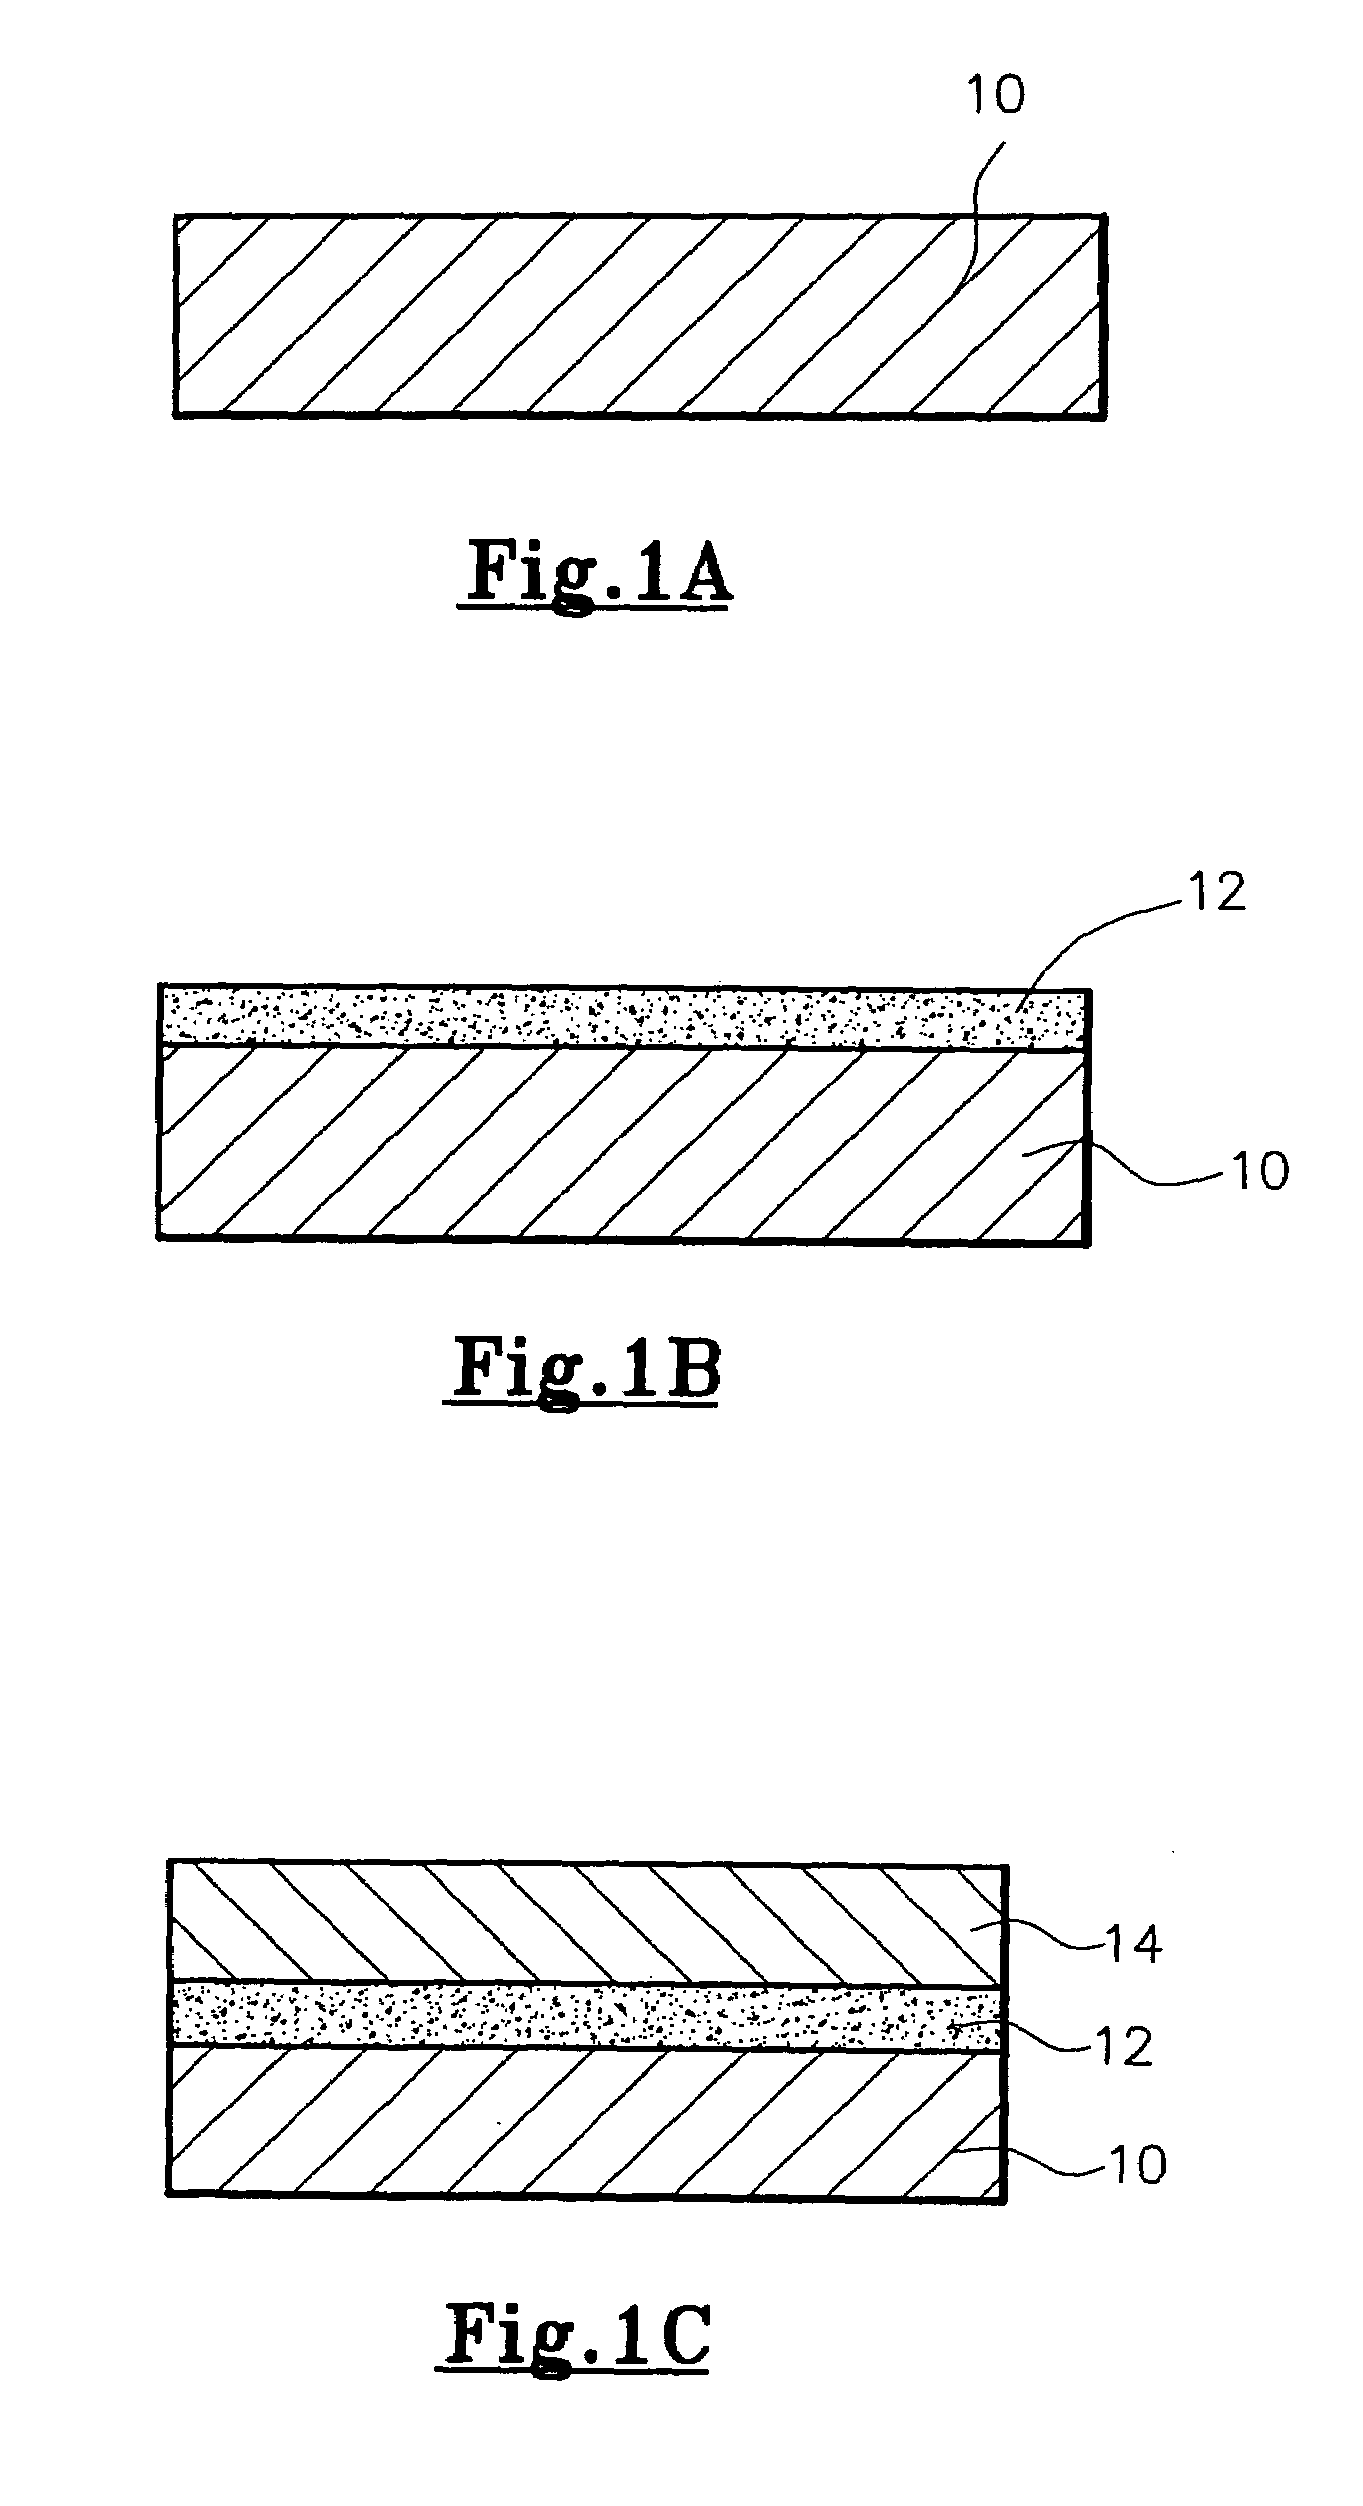 Method of forming a nanocomposite coating